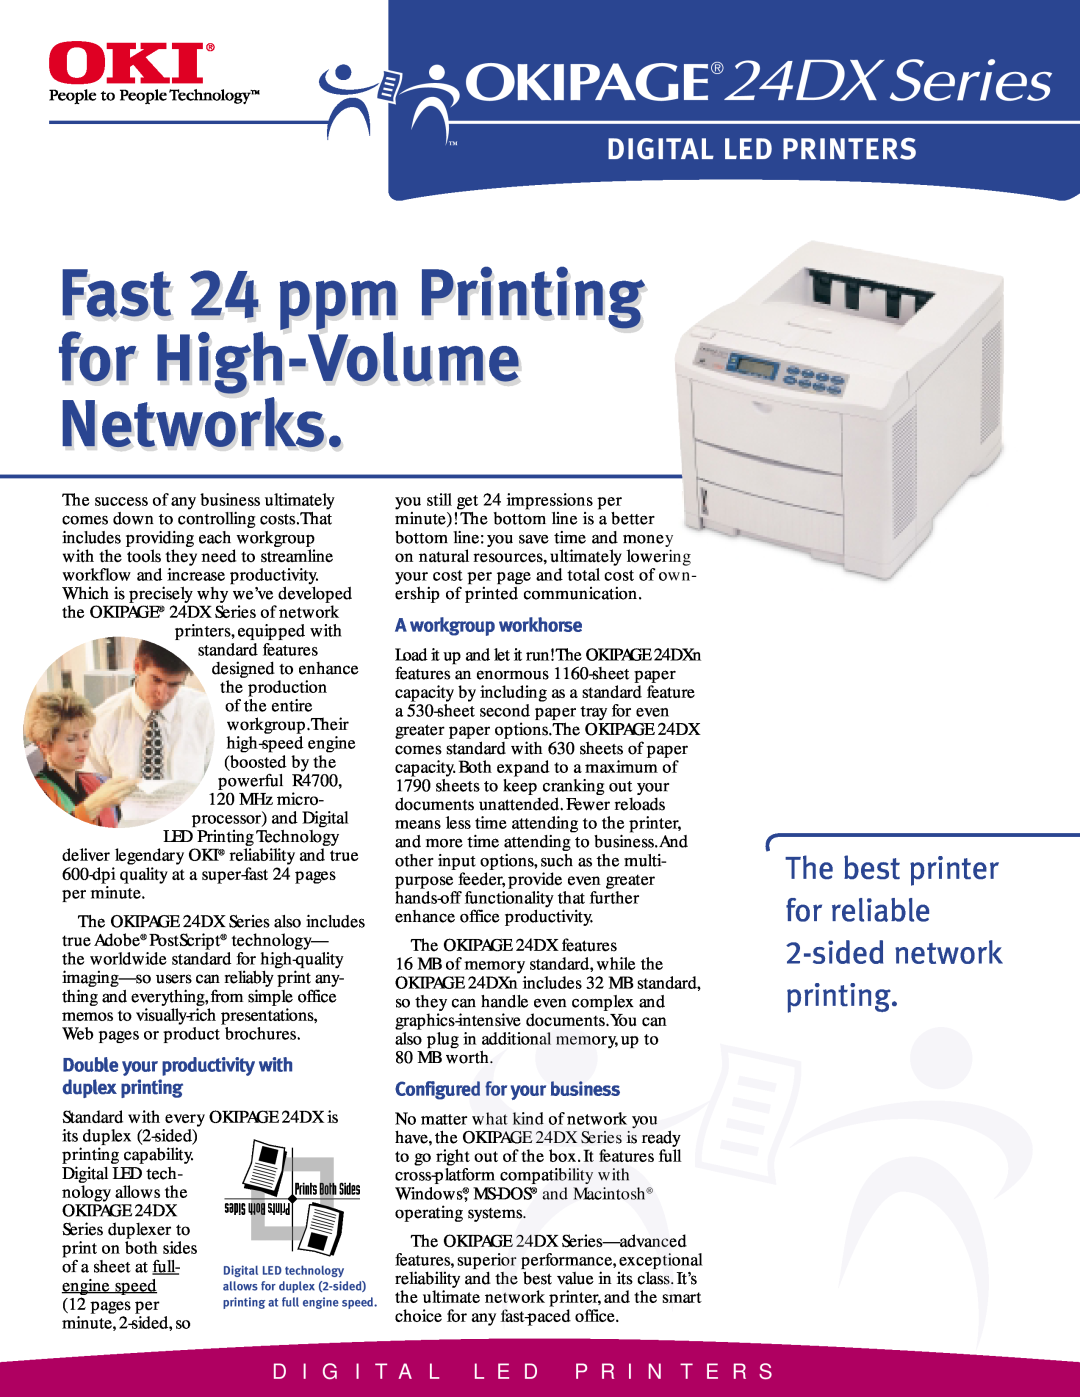 Oki 24DX Series brochure A L L E D P R I N T E R S, Double your productivity with duplex printing, A workgroup workhorse 